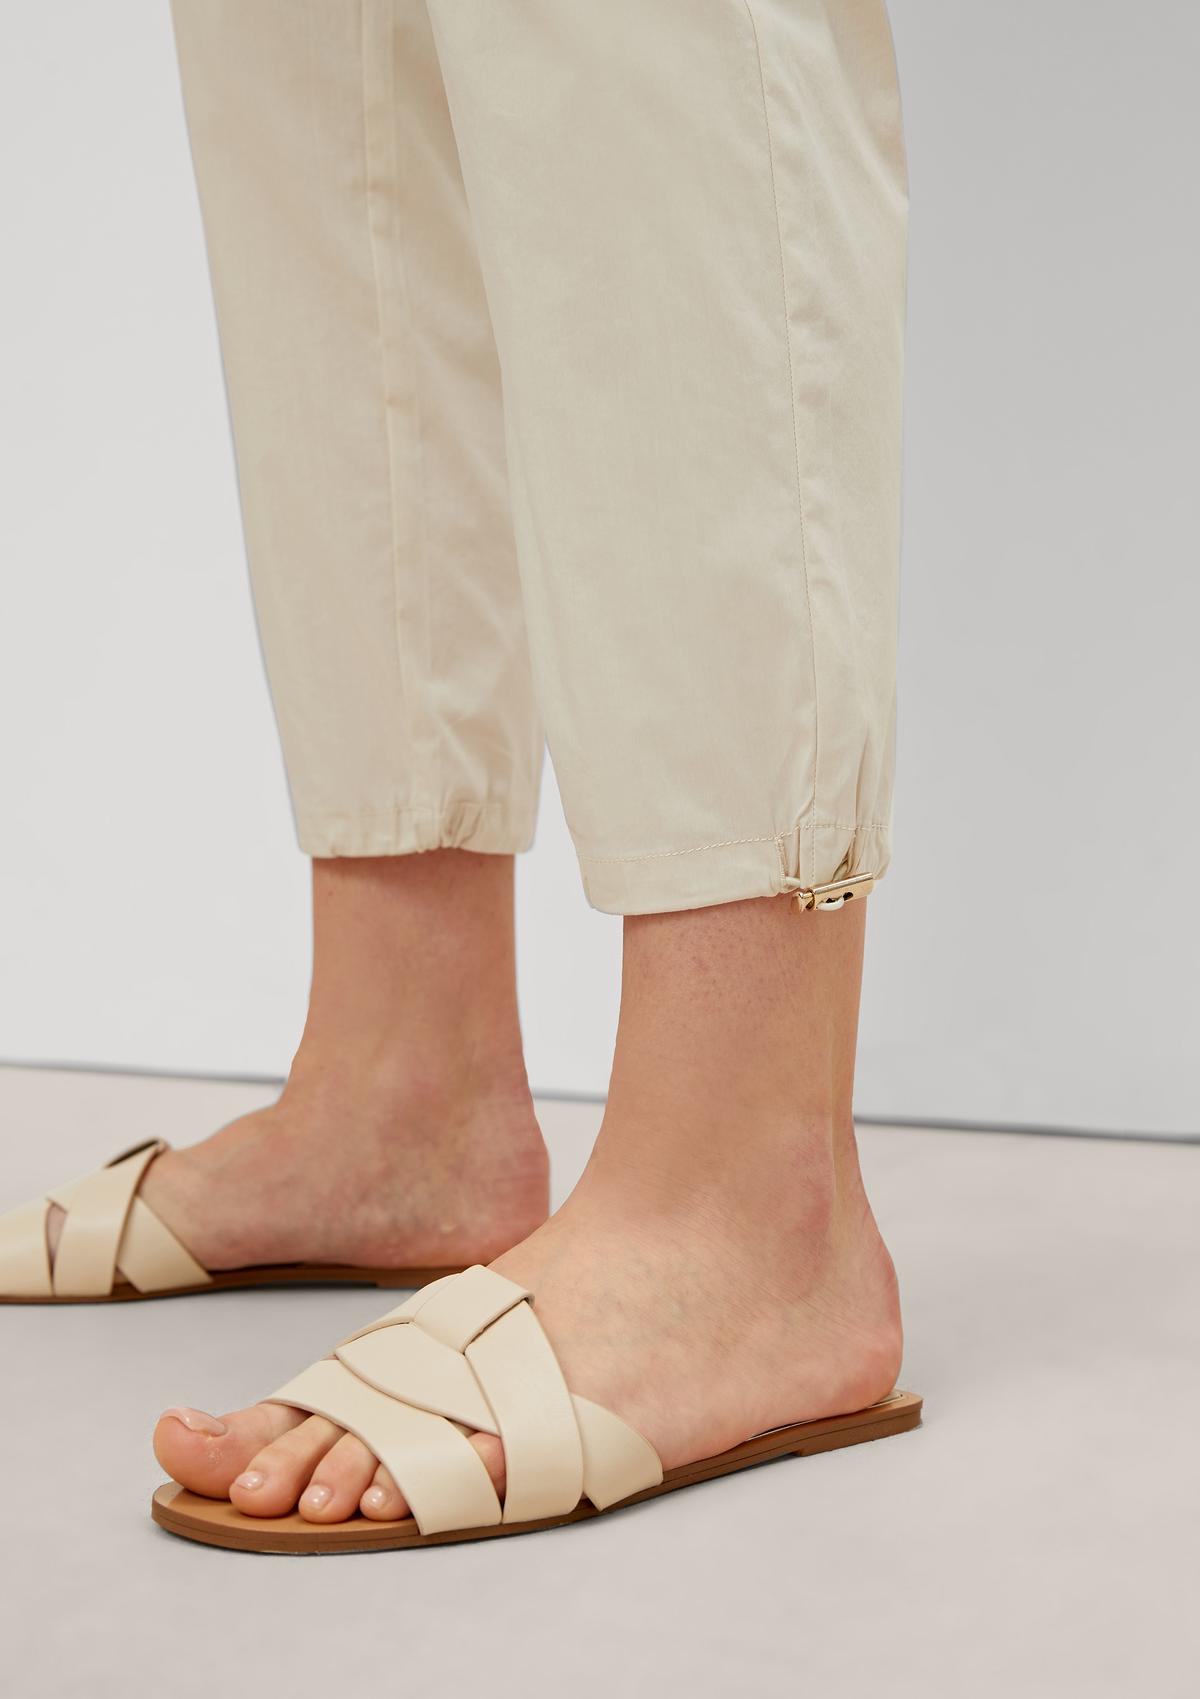 comma Relaxed: trousers with an elasticated frilled waistband